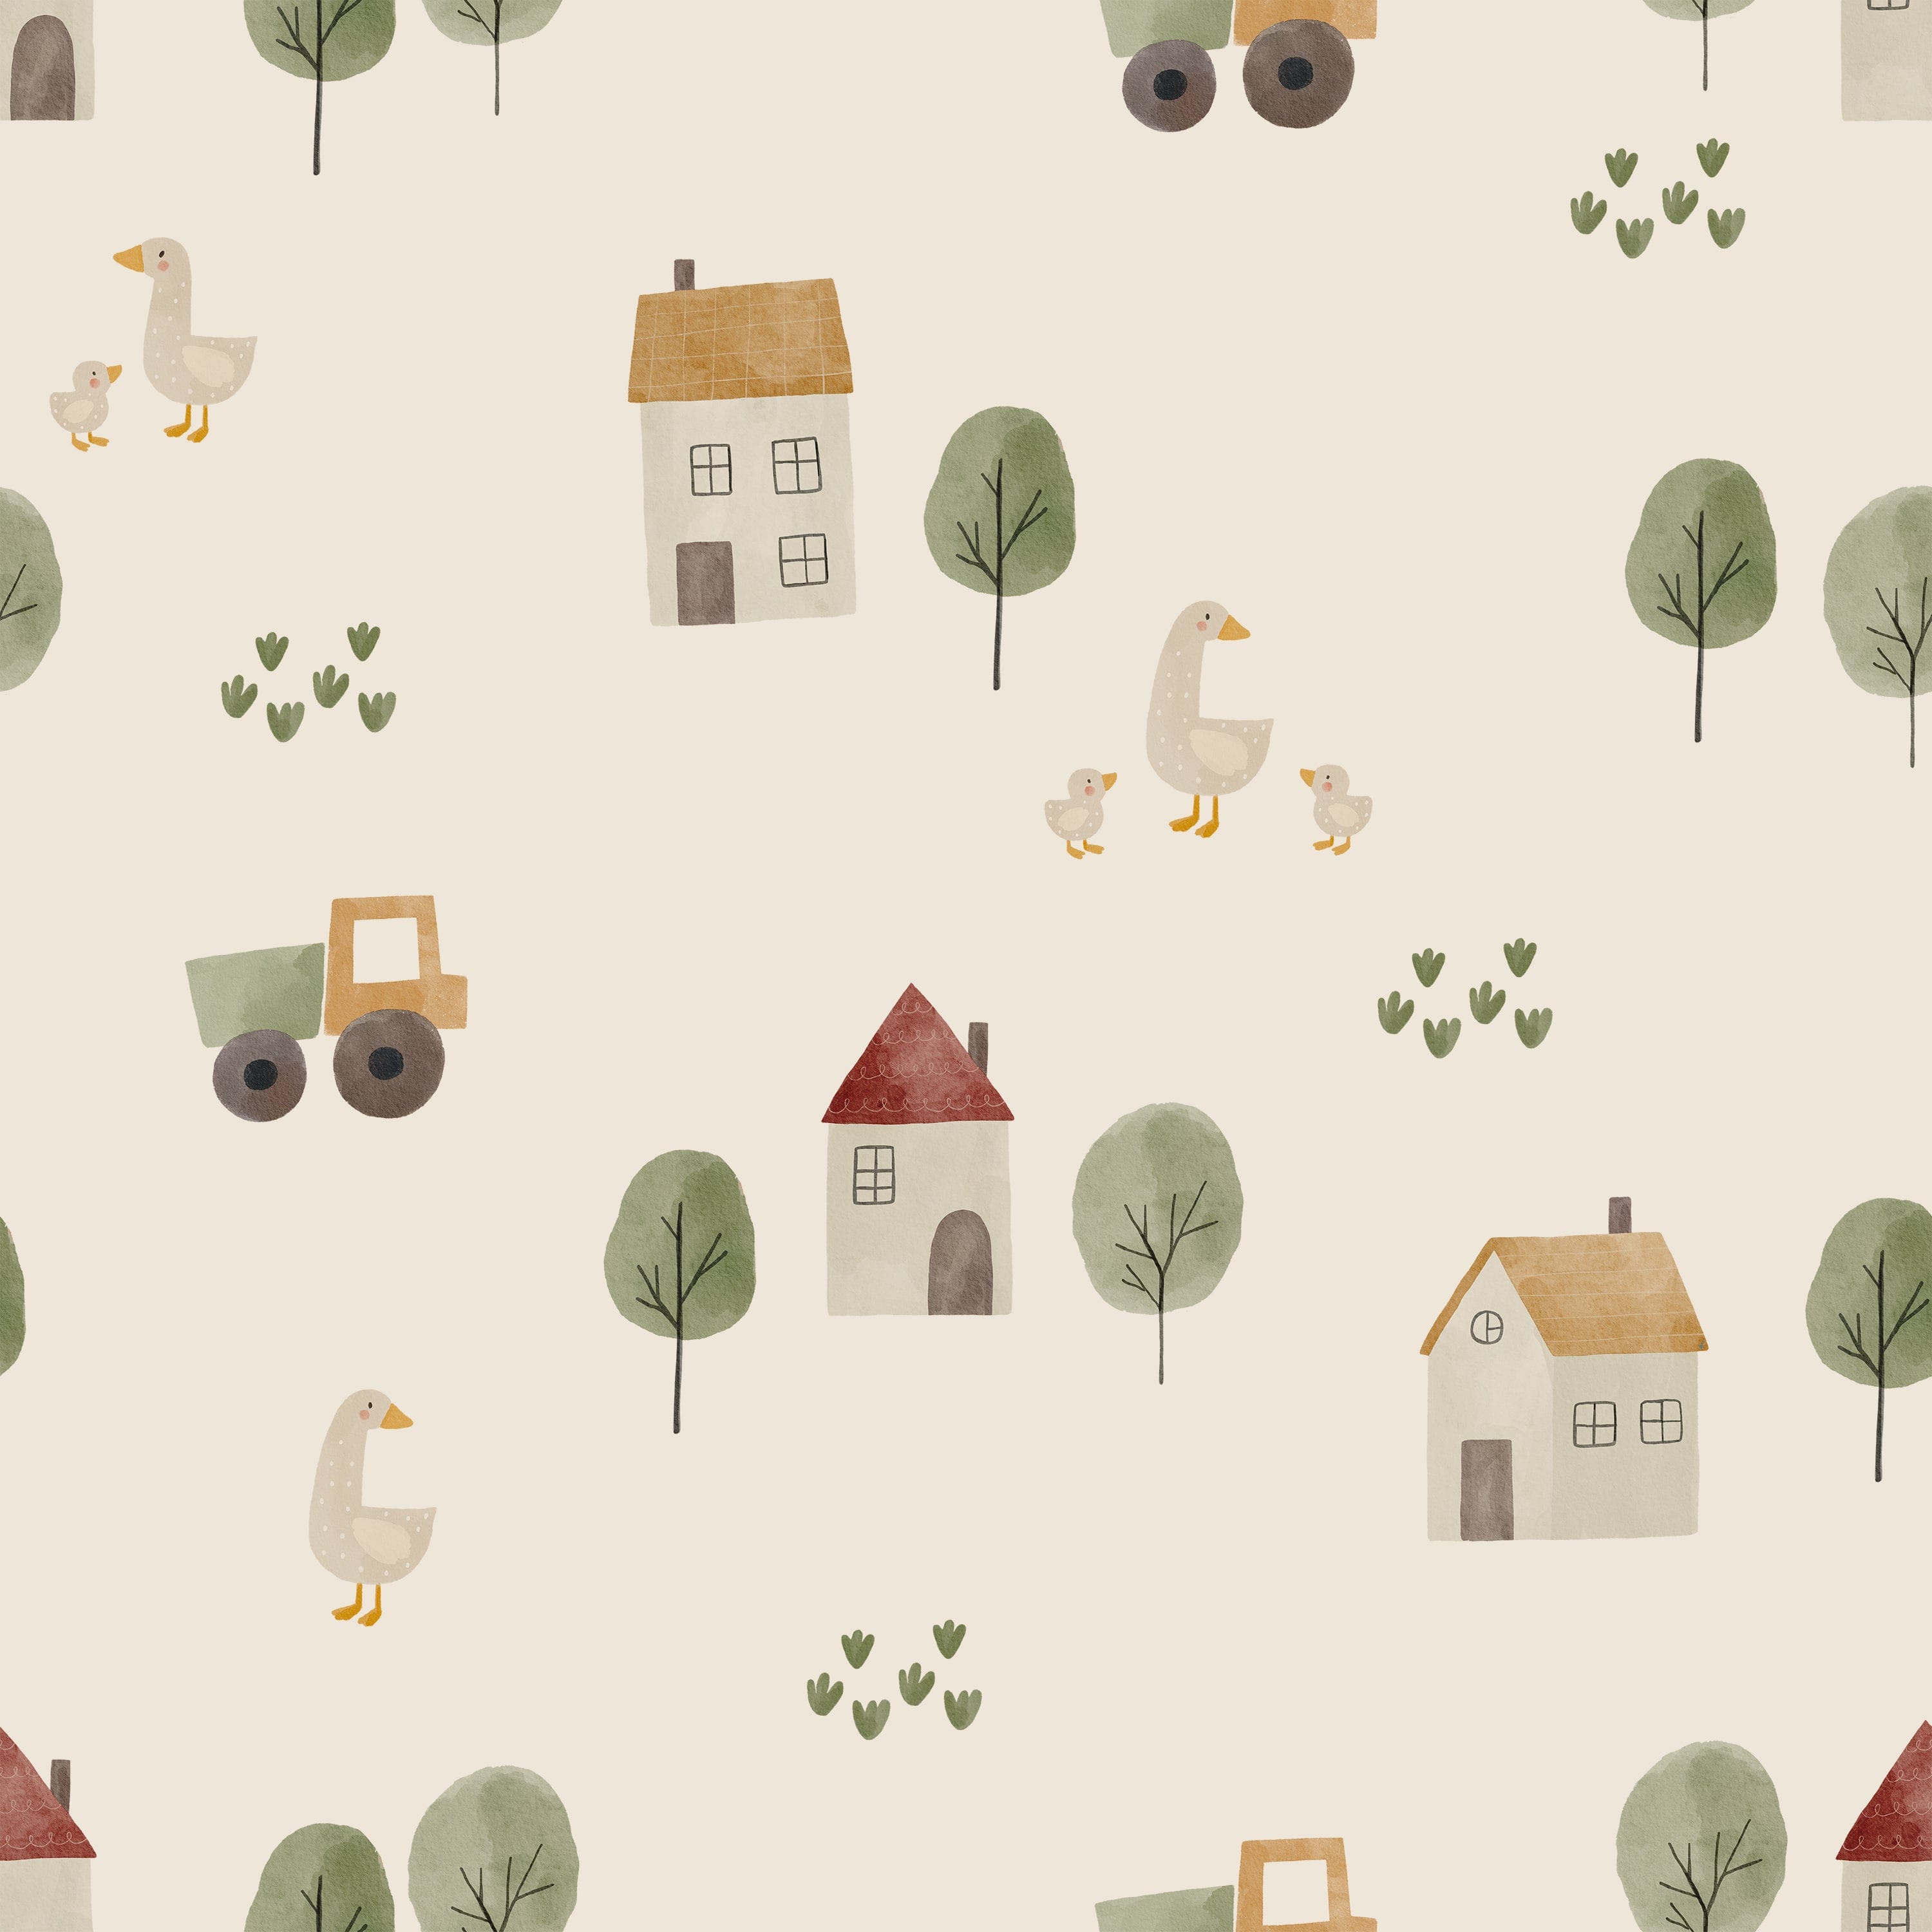 A seamless pattern of Farm Friend Wallpaper - Happy Goslings, featuring hand-drawn illustrations of houses, trees, tractors, geese with goslings, and grass on an ecru background.